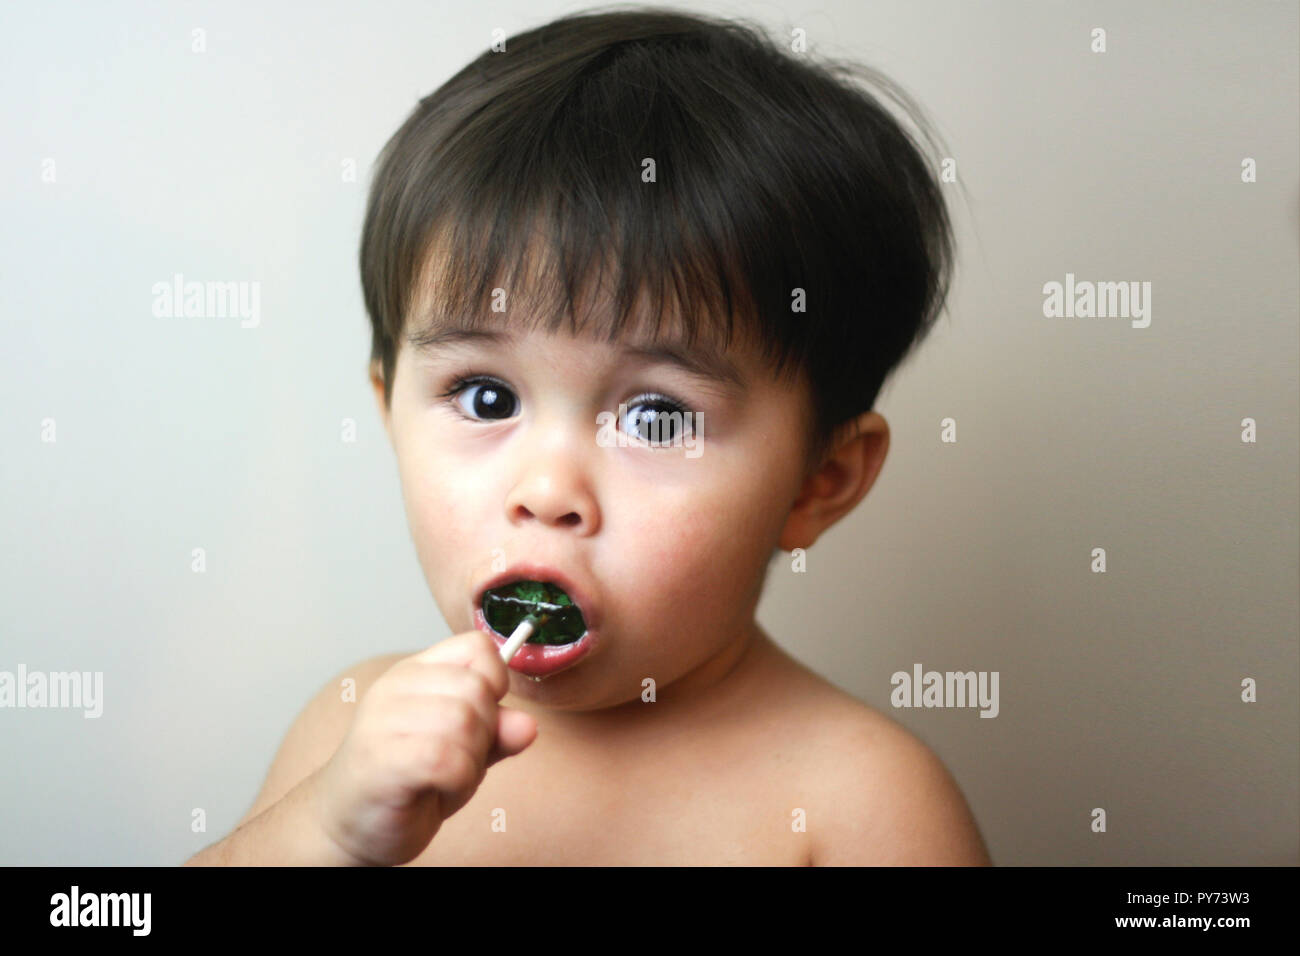 Cute toddler with creepy green scorpion candy Stock Photo